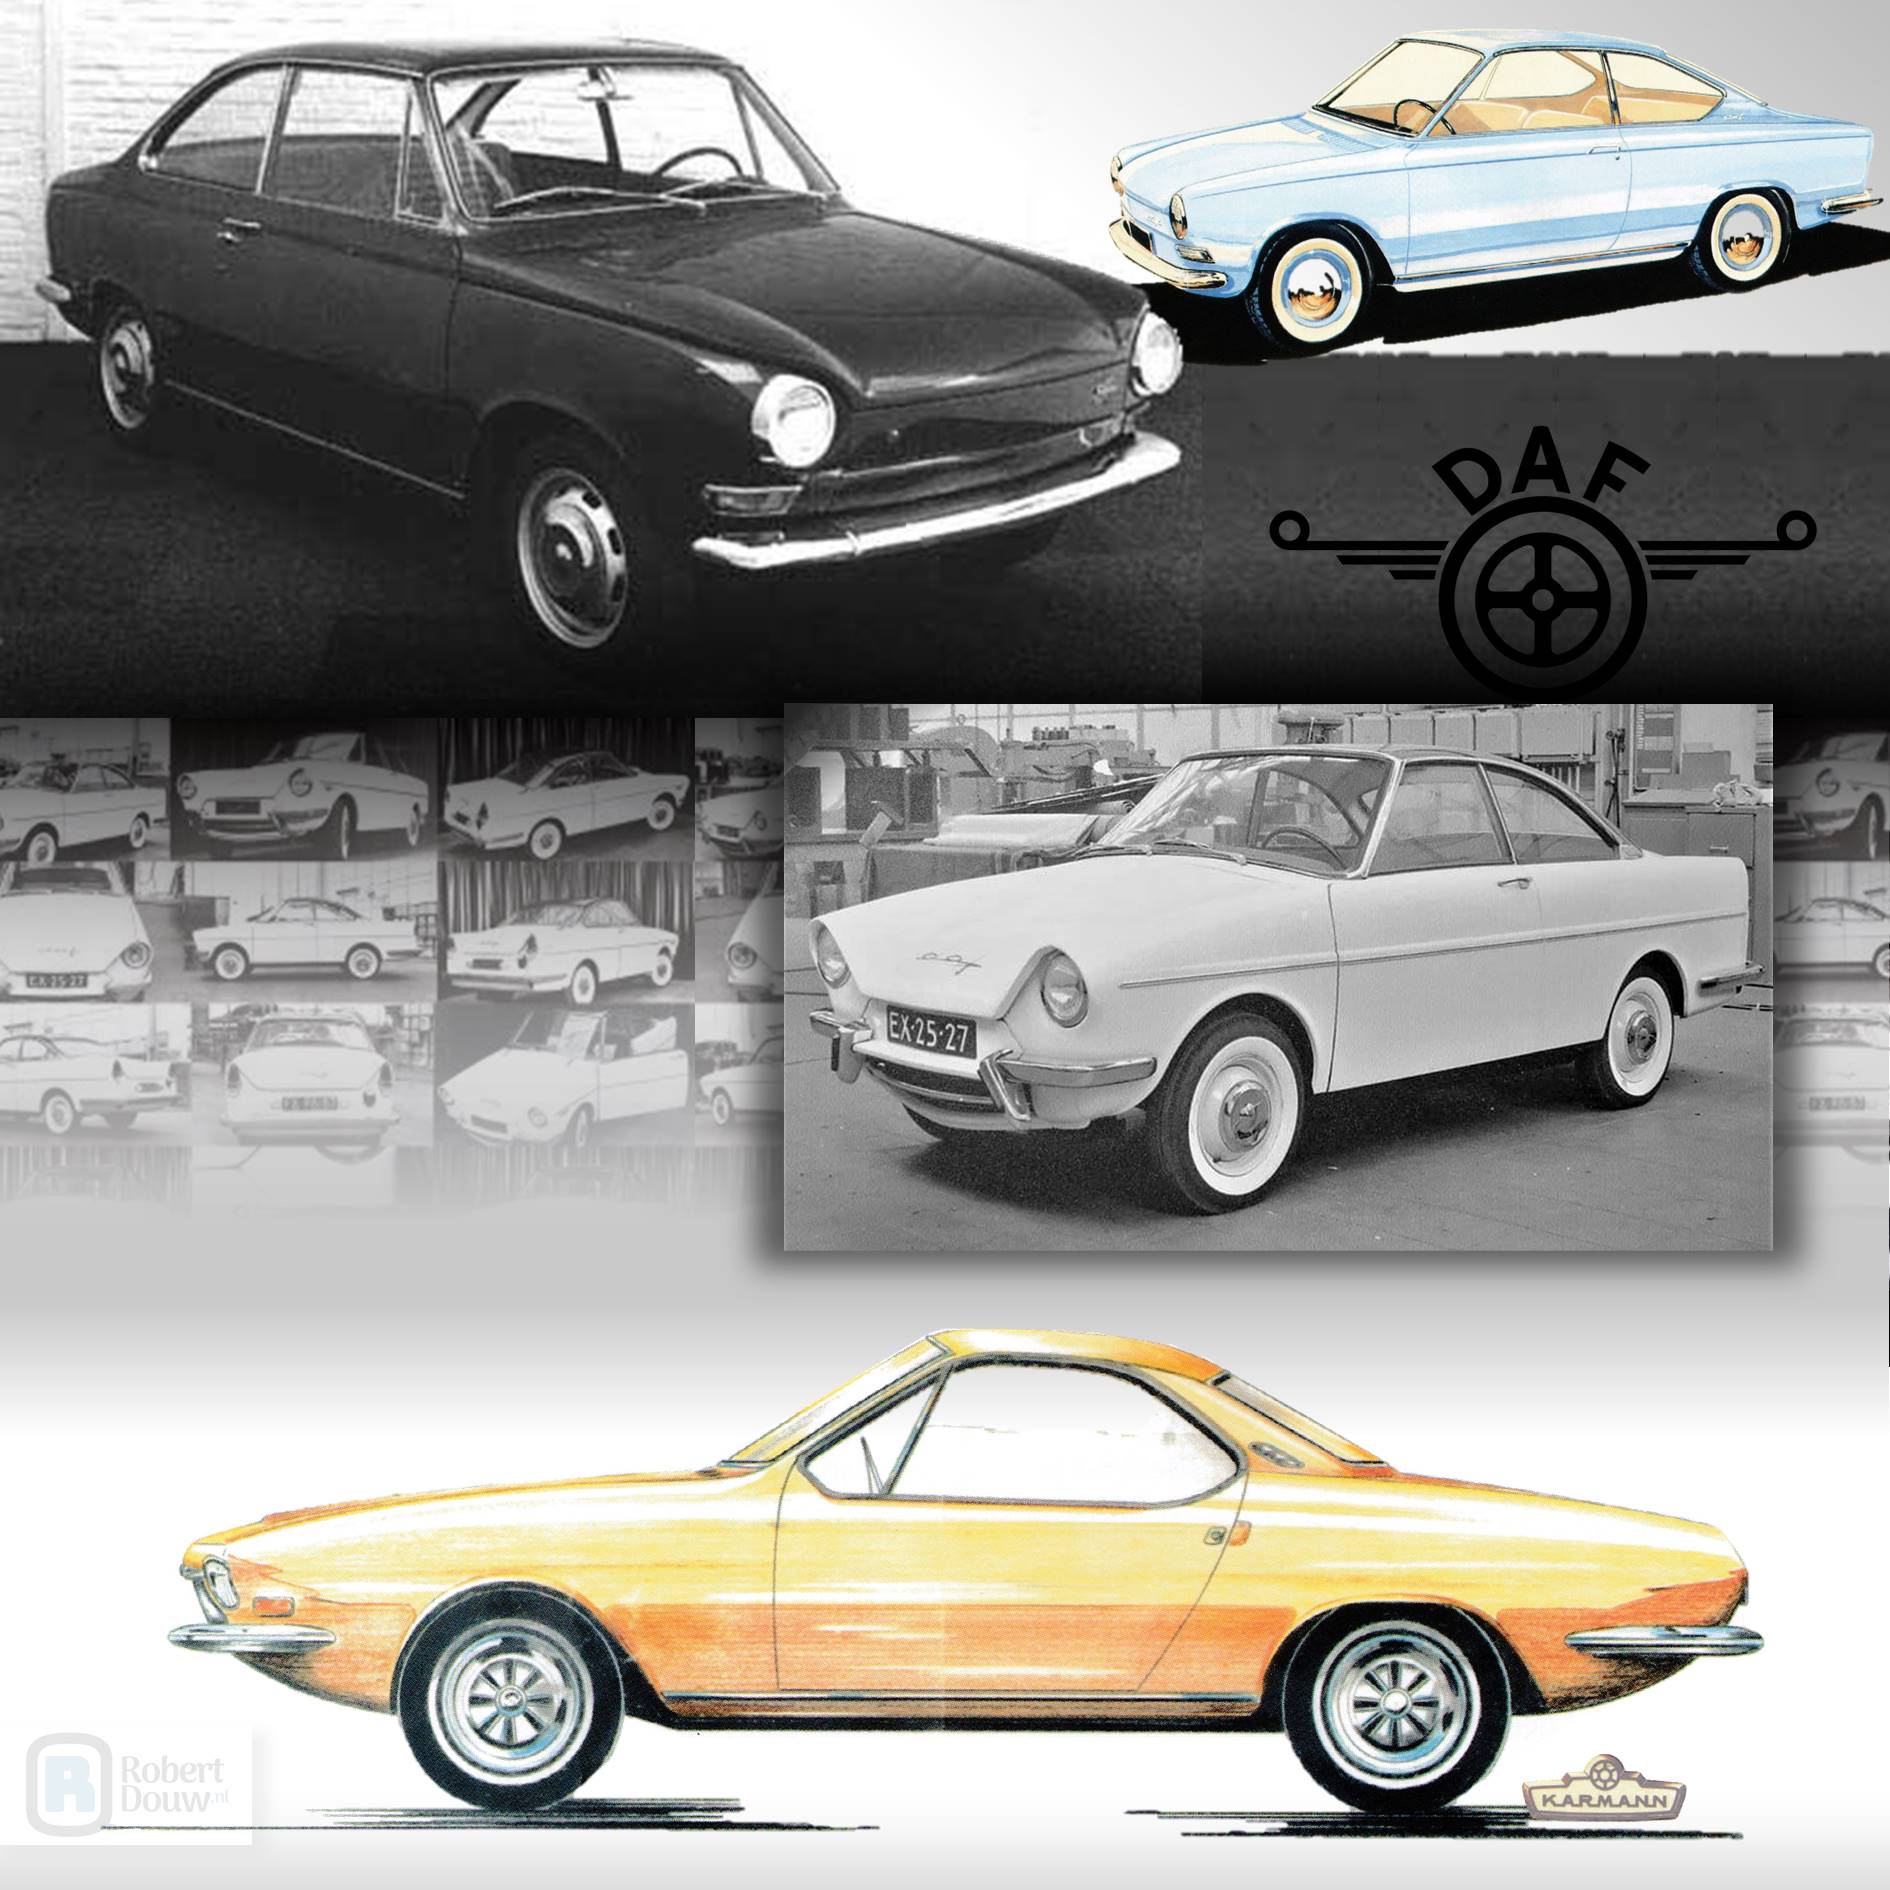 Photos and drawings of coupés.